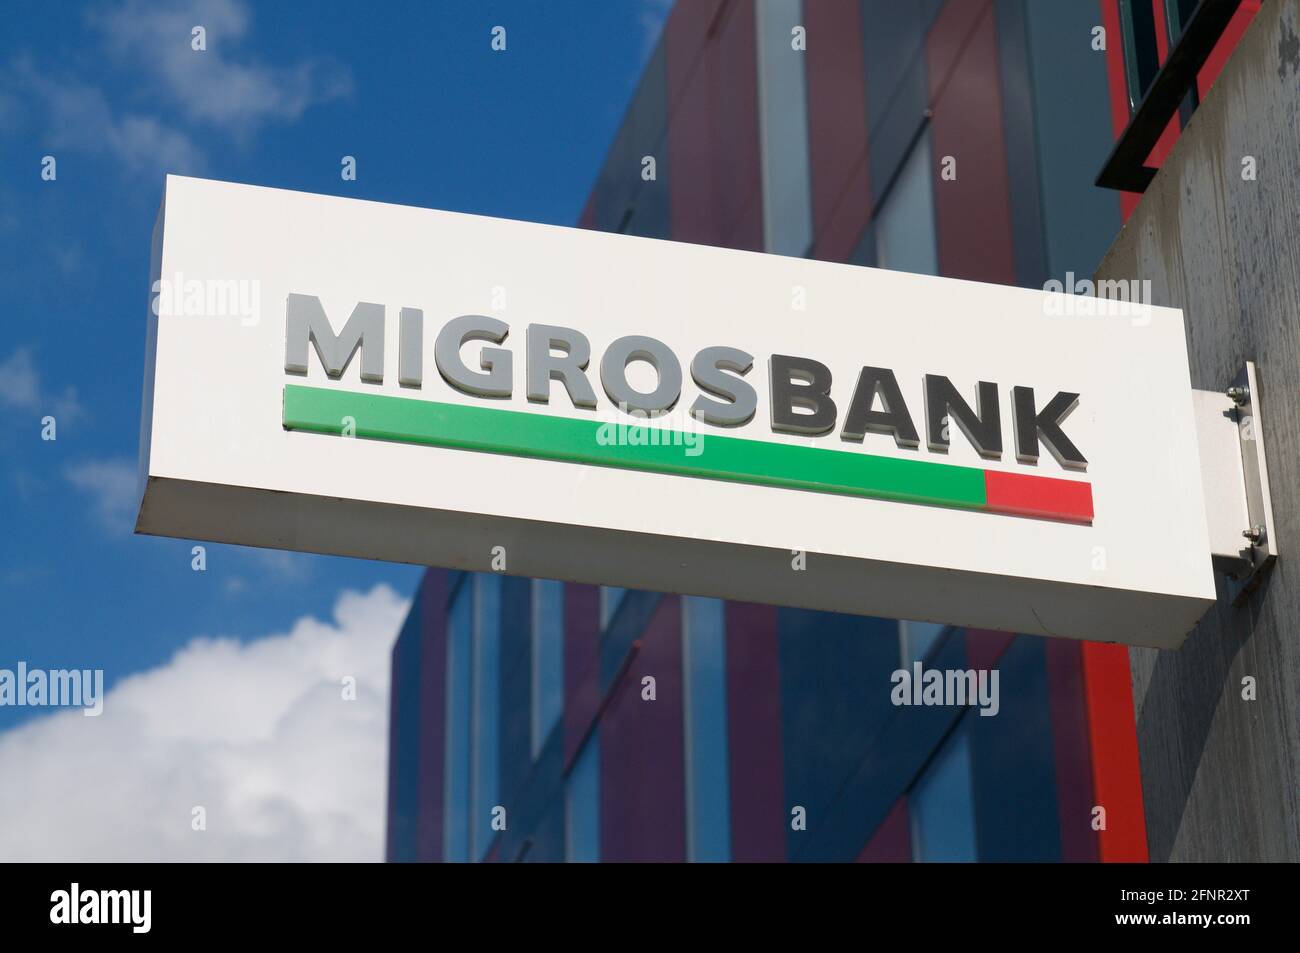 Wohlen, Aargau, Switzerland - 15th April 2021 : Migros Bank sign hanging on the building in the city of Wohlen, Switzerland Stock Photo